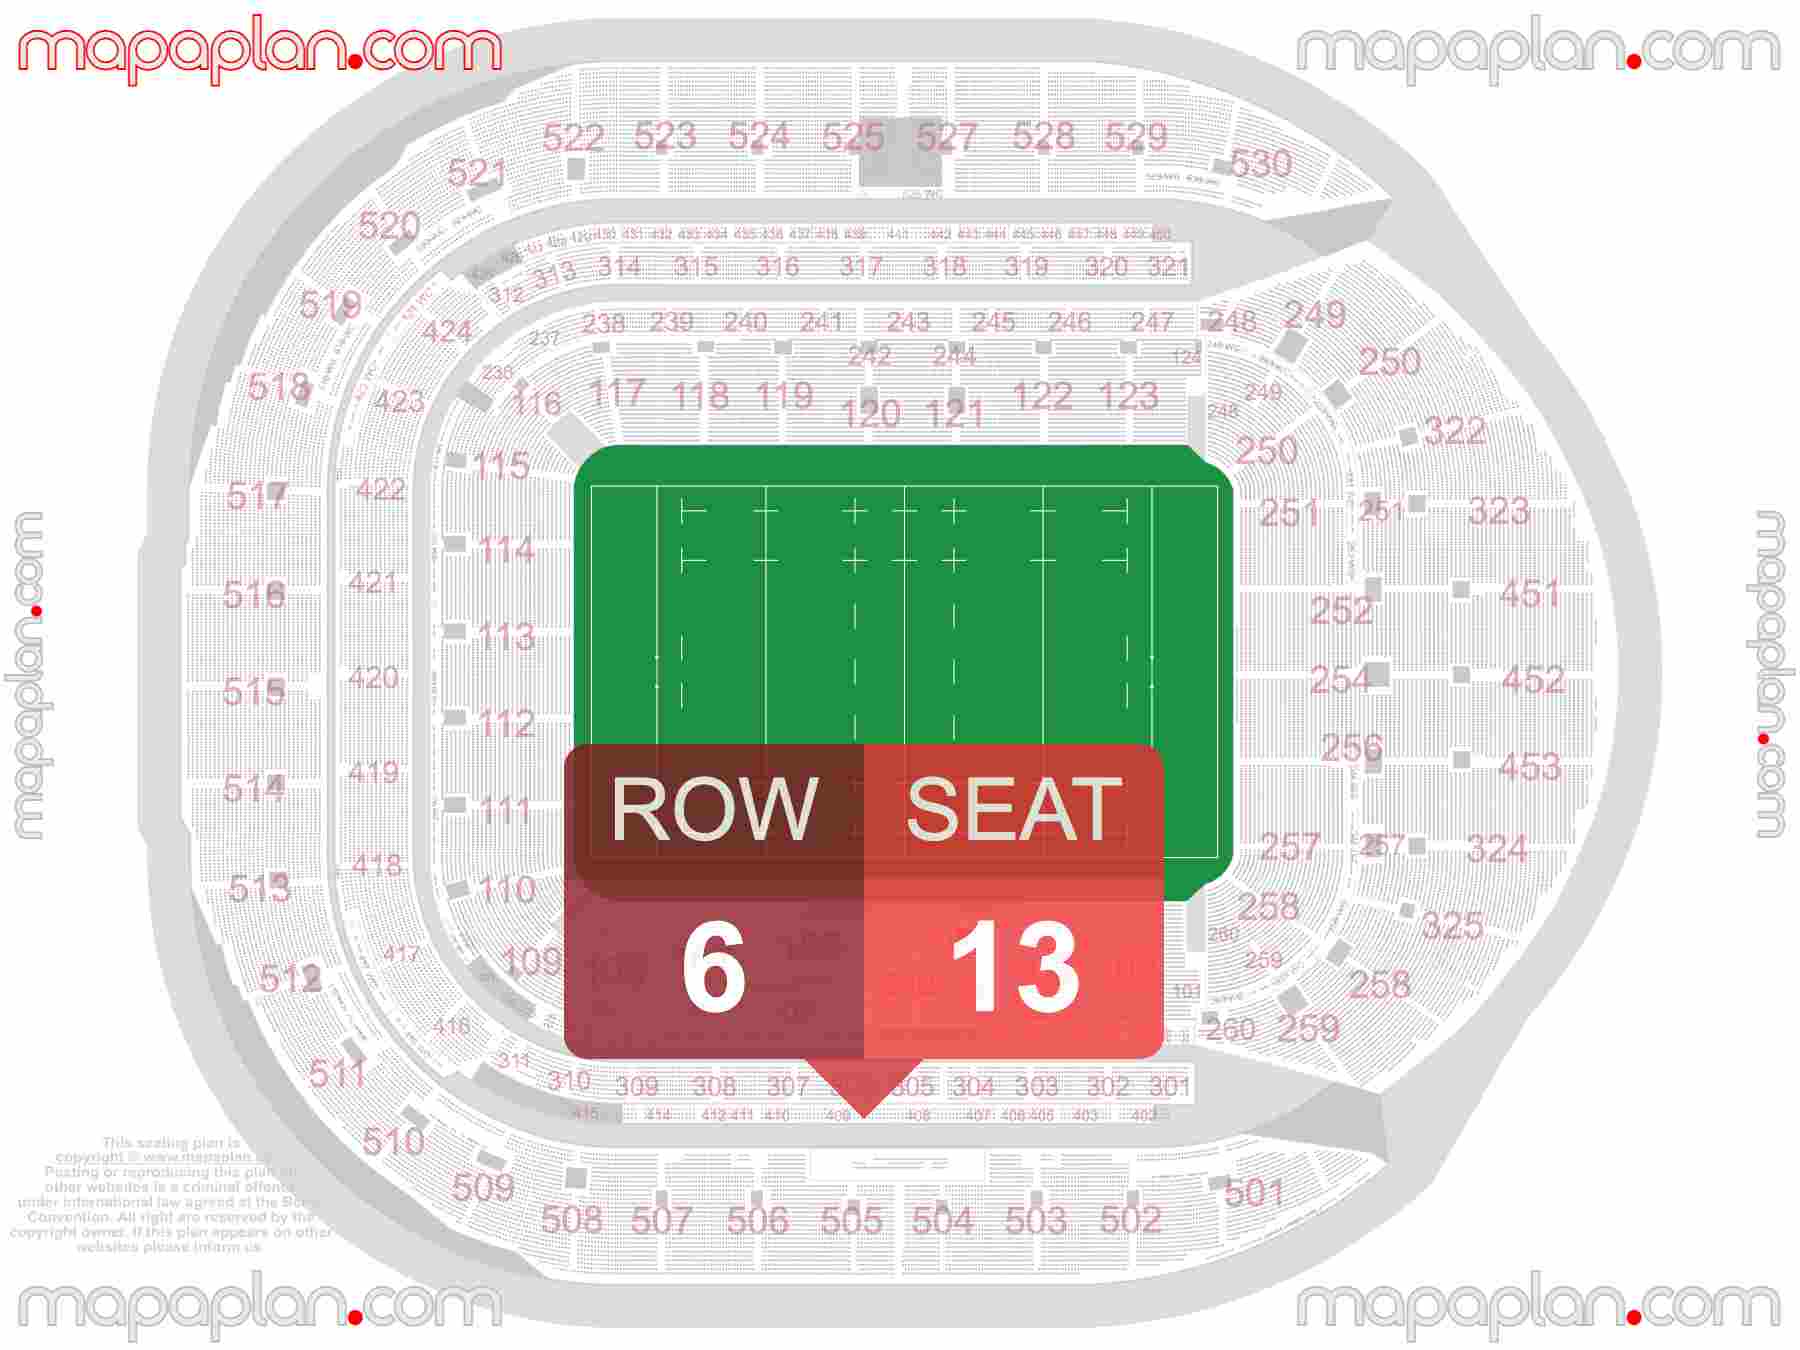 London Tottenham Hotspur Stadium seating plan NFL American football seating plan with exact section numbers showing best rows and seats selection 3d layout - Best interactive seat finder tool with precise detailed location data